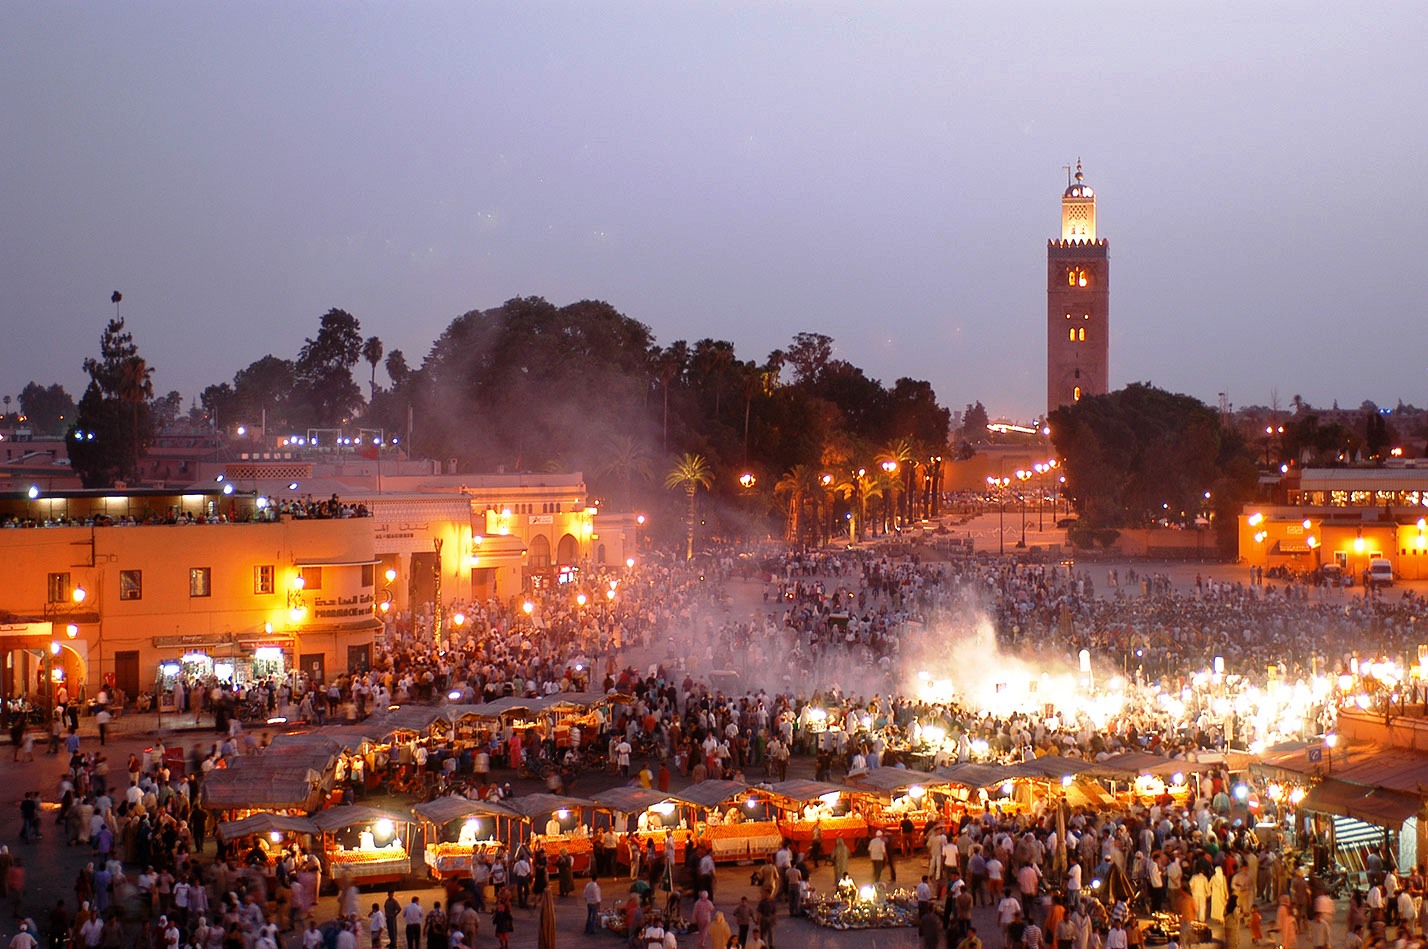 14 days discover Morocco tour from Marrakech to visit the highlights of Morocco